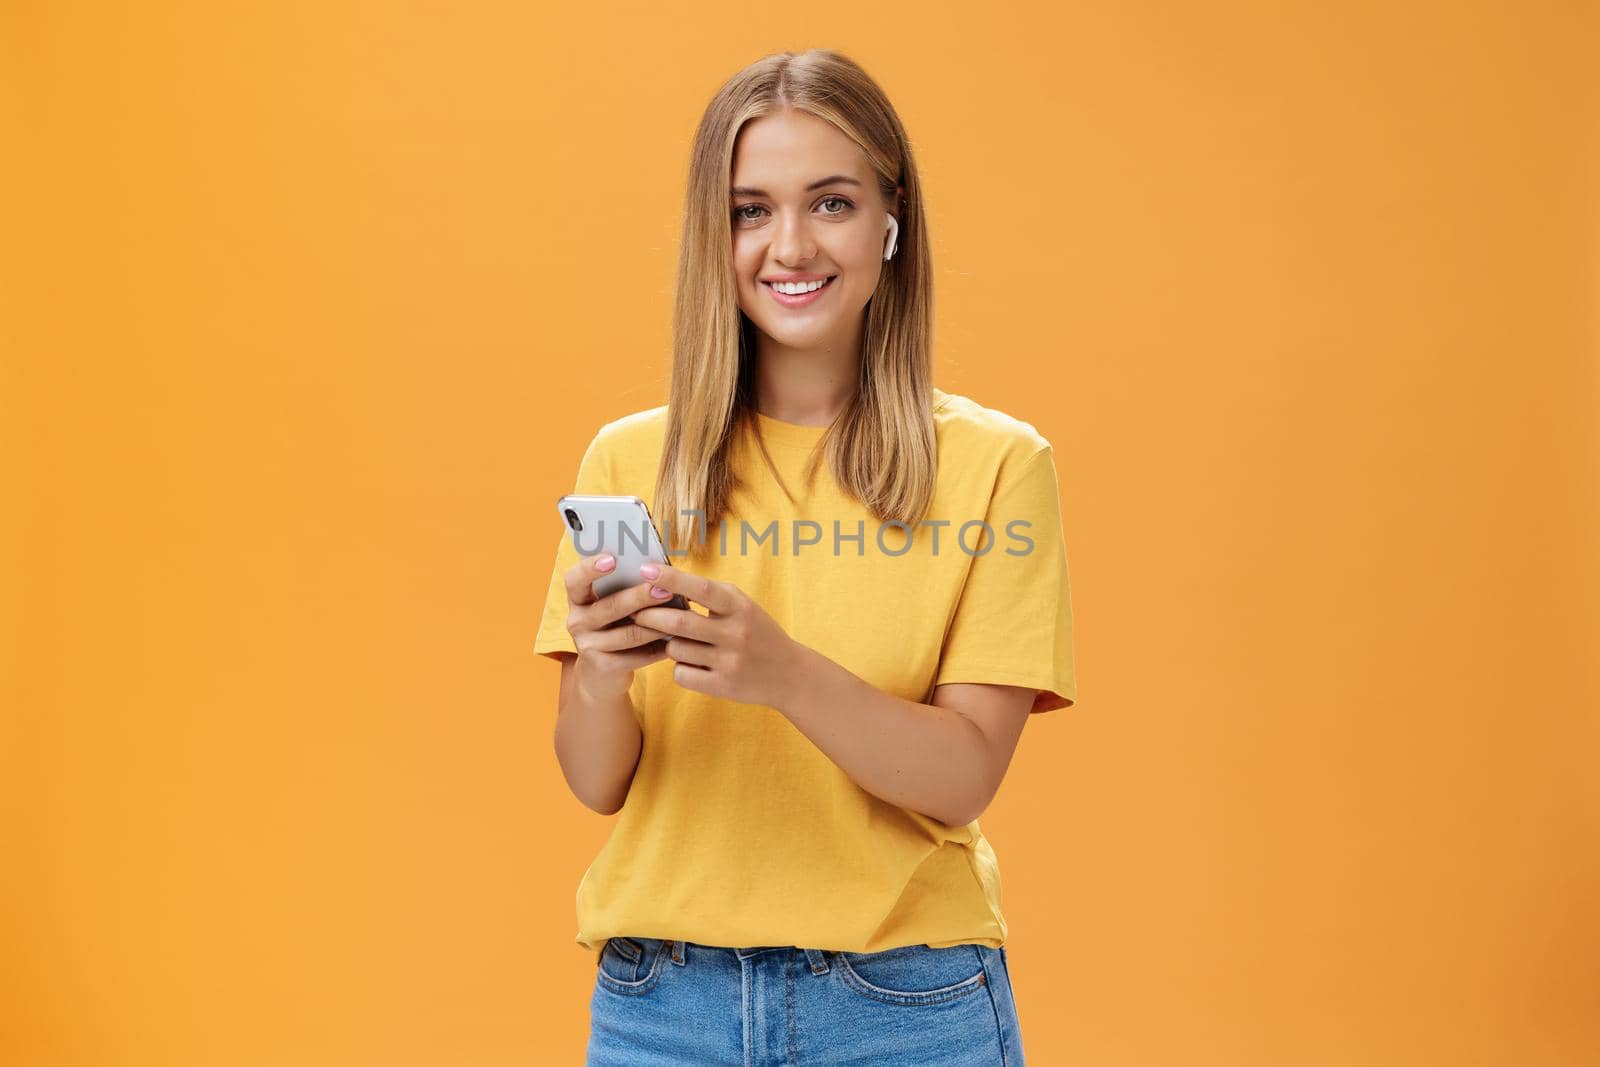 Young caucasian girl with tanned skin and fair hair using wireless earphones to call friend via smartphone holding cellphone against chest, smiling cheerfully at camera getting used to new technology.